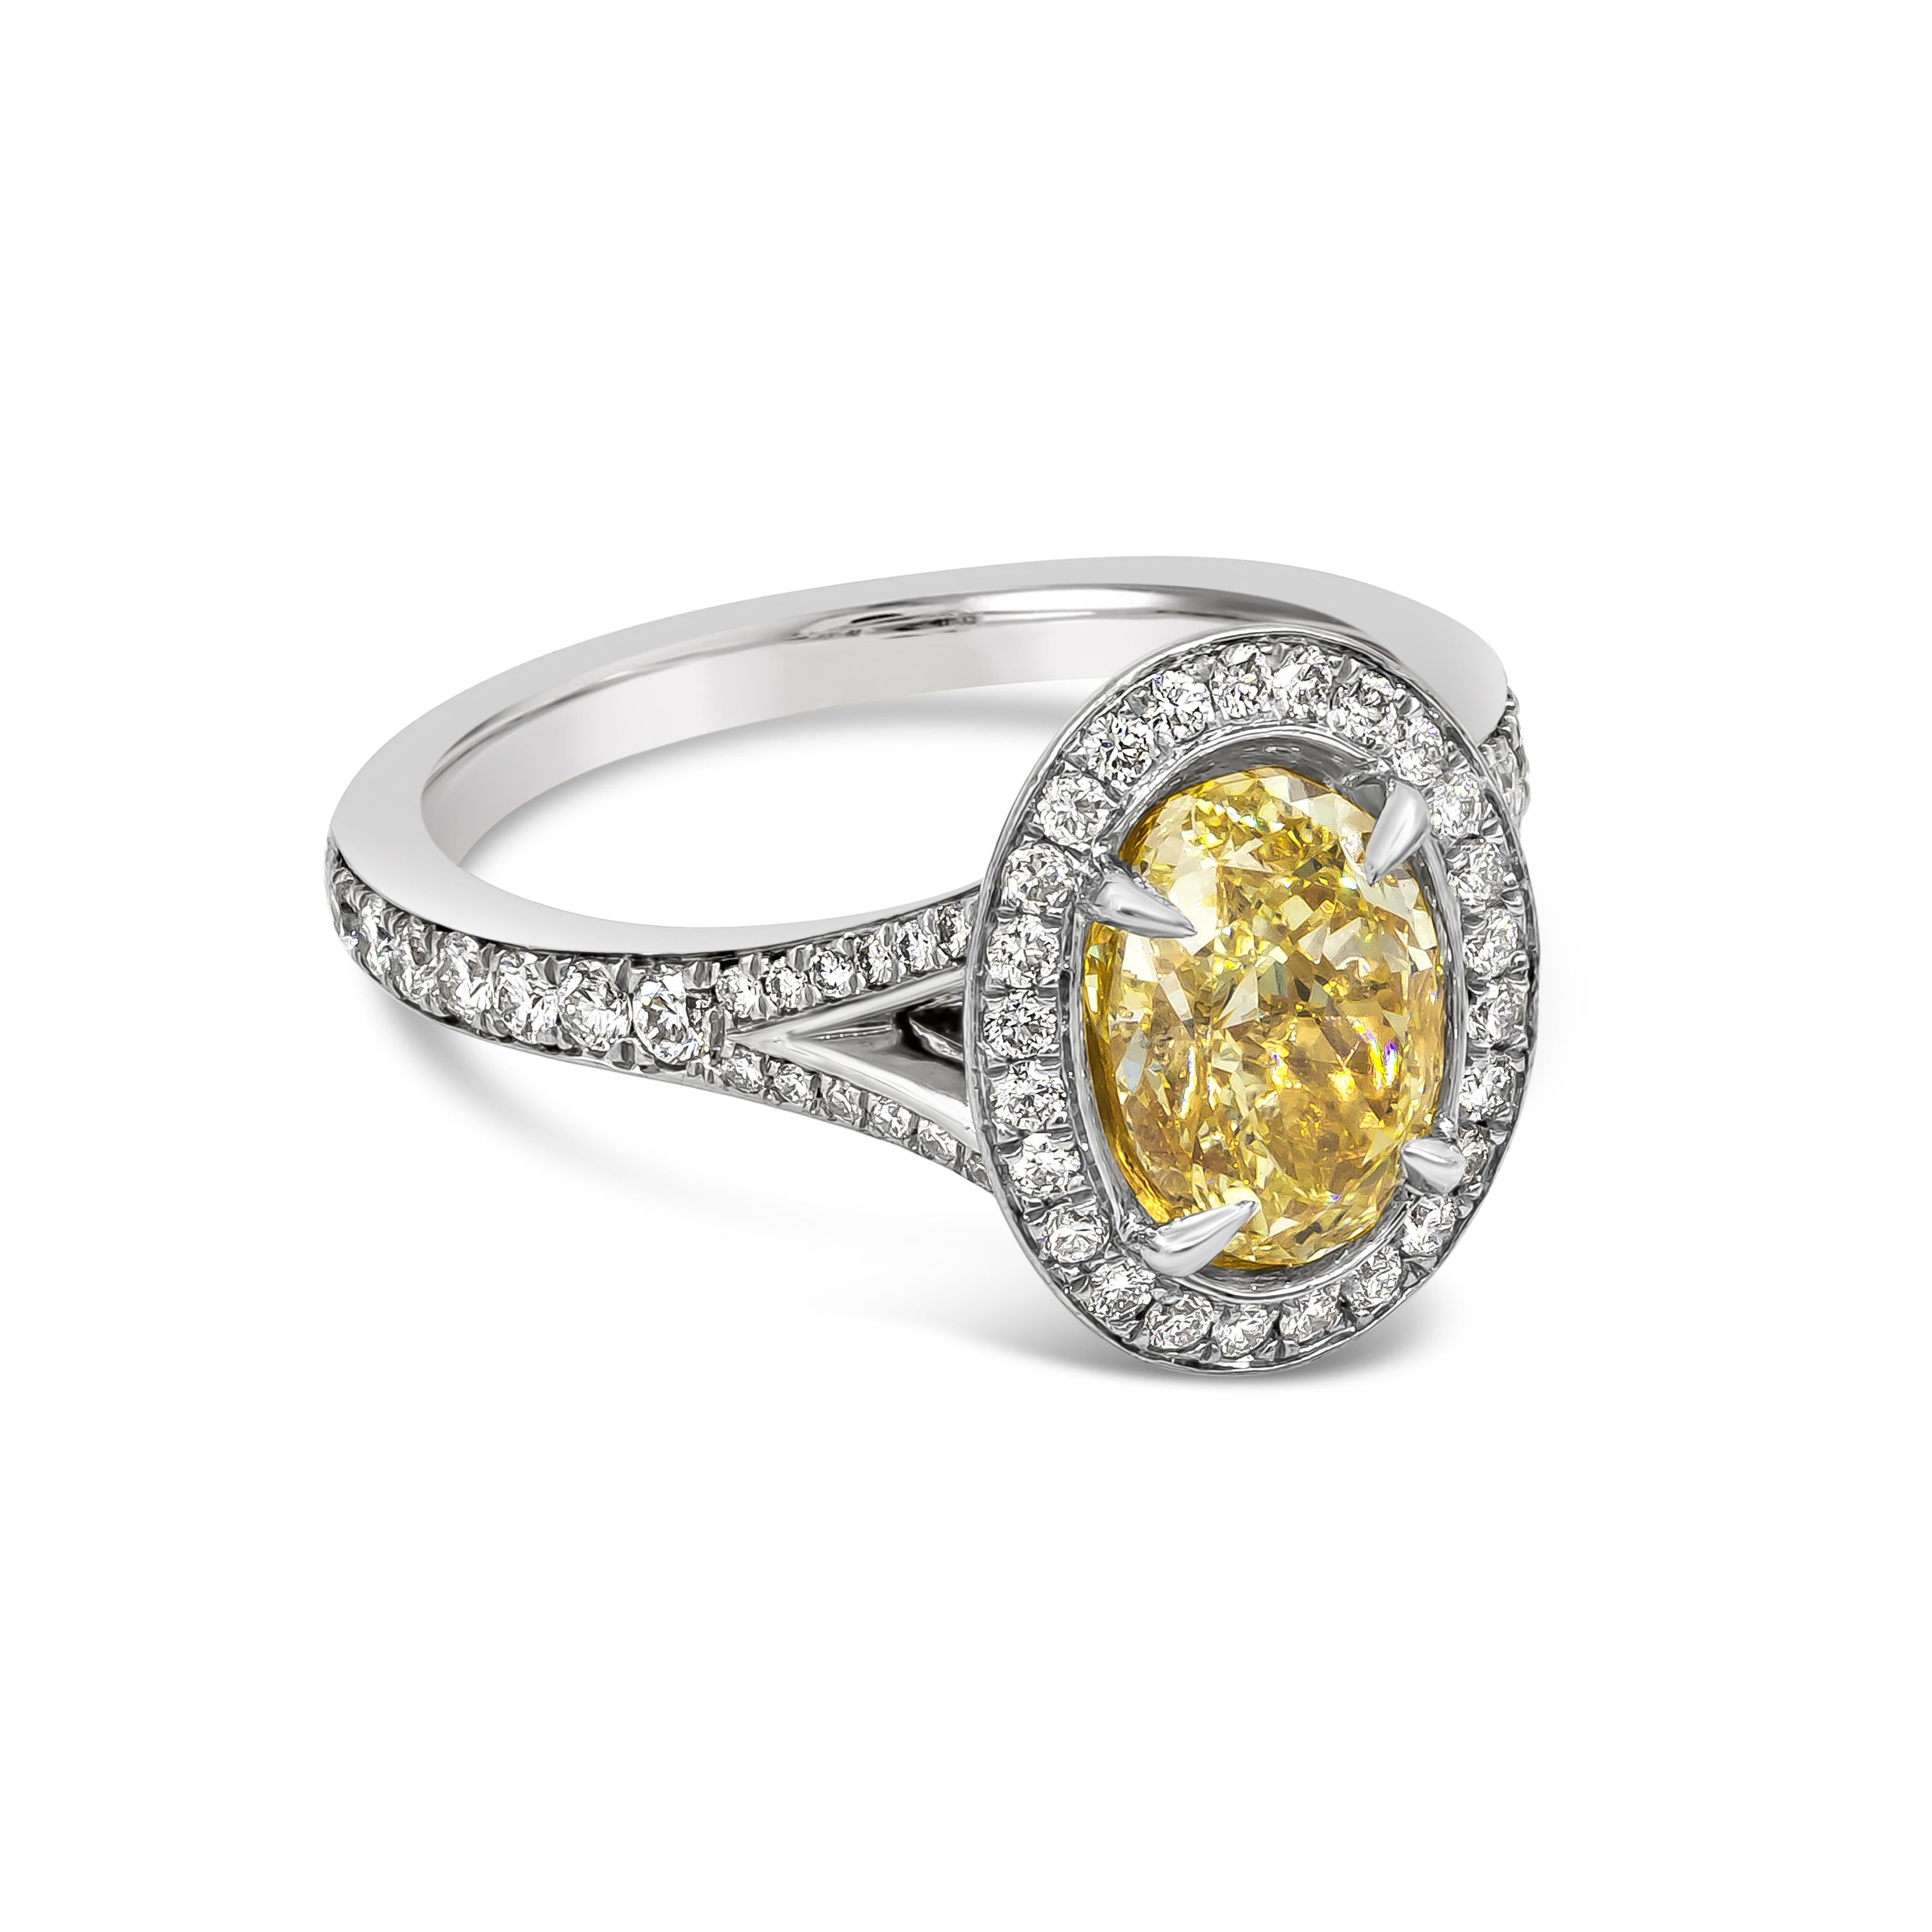 A gorgeous engagement ring, featuring a color-rich 1.76 carats oval cut diamond GIA certified as Fancy Light Yellow color and VS2 clarity. Surrounded by a single row of round brilliant cut diamonds in a halo bezel setting. Set in a split-shank